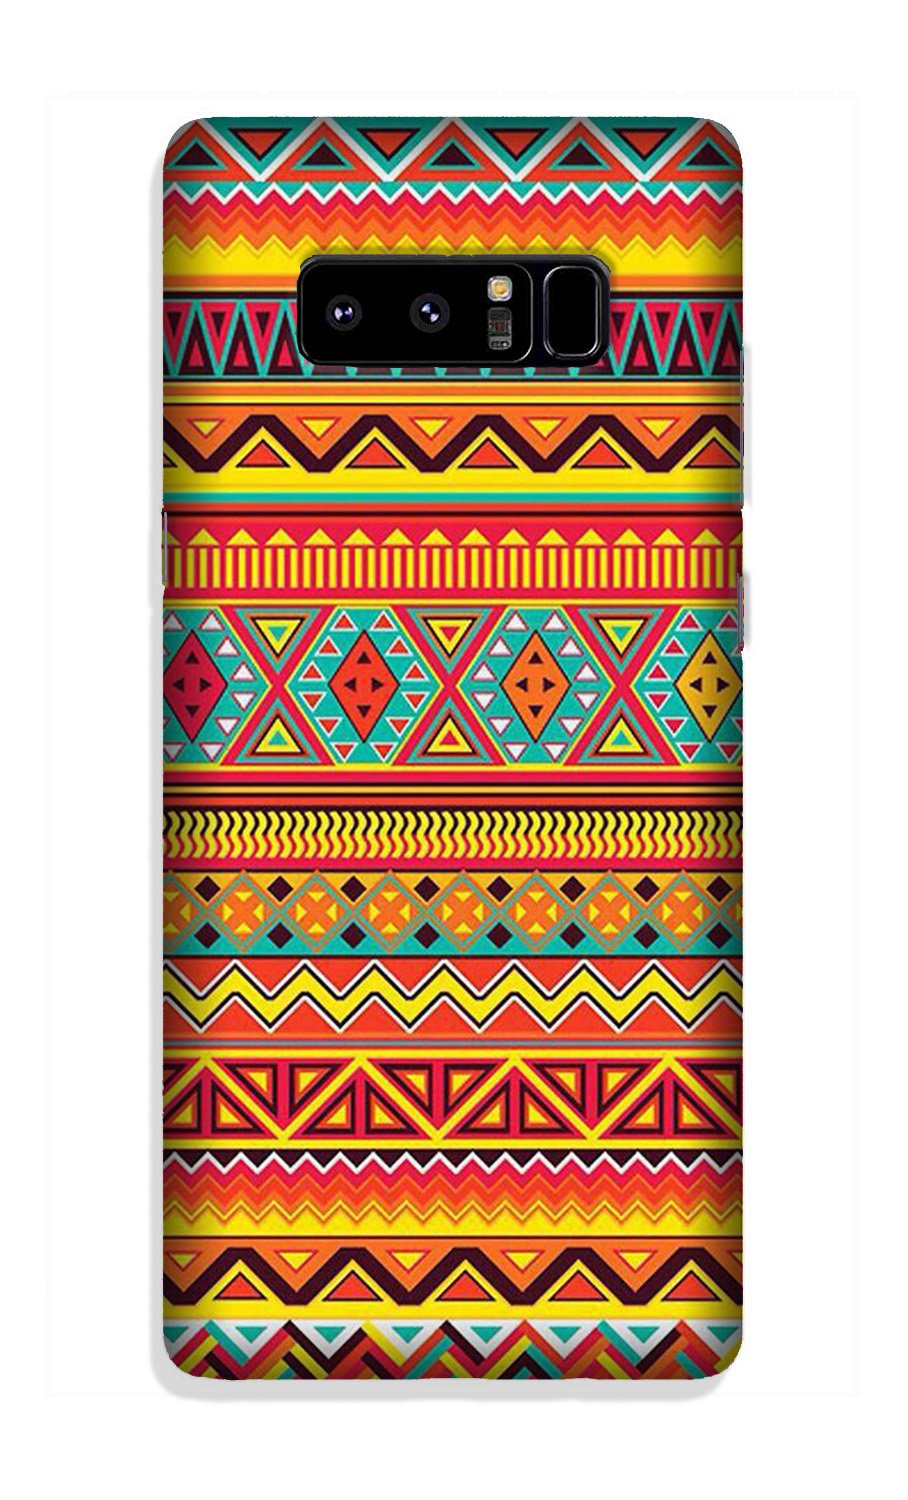 Zigzag line pattern Case for Galaxy Note 8